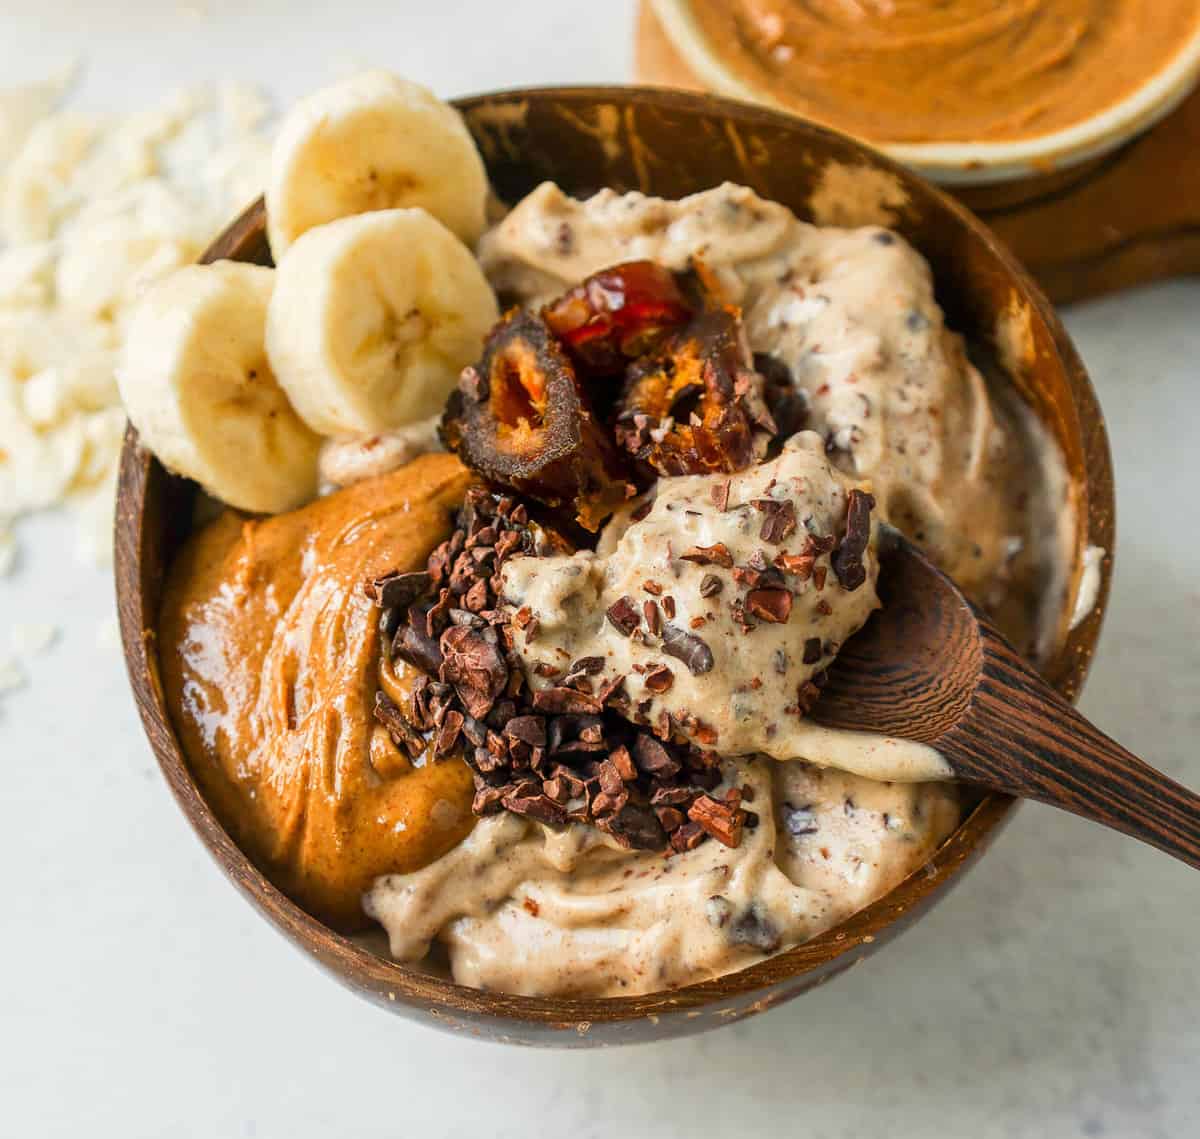 Chunky Monkey Chocolate Peanut Butter Banana Smoothie Bowl:

This one is for all of my peanut butter lovers out there! This is my chunky, crunchy, creamy, nutty peanut butter smoothie bowl.